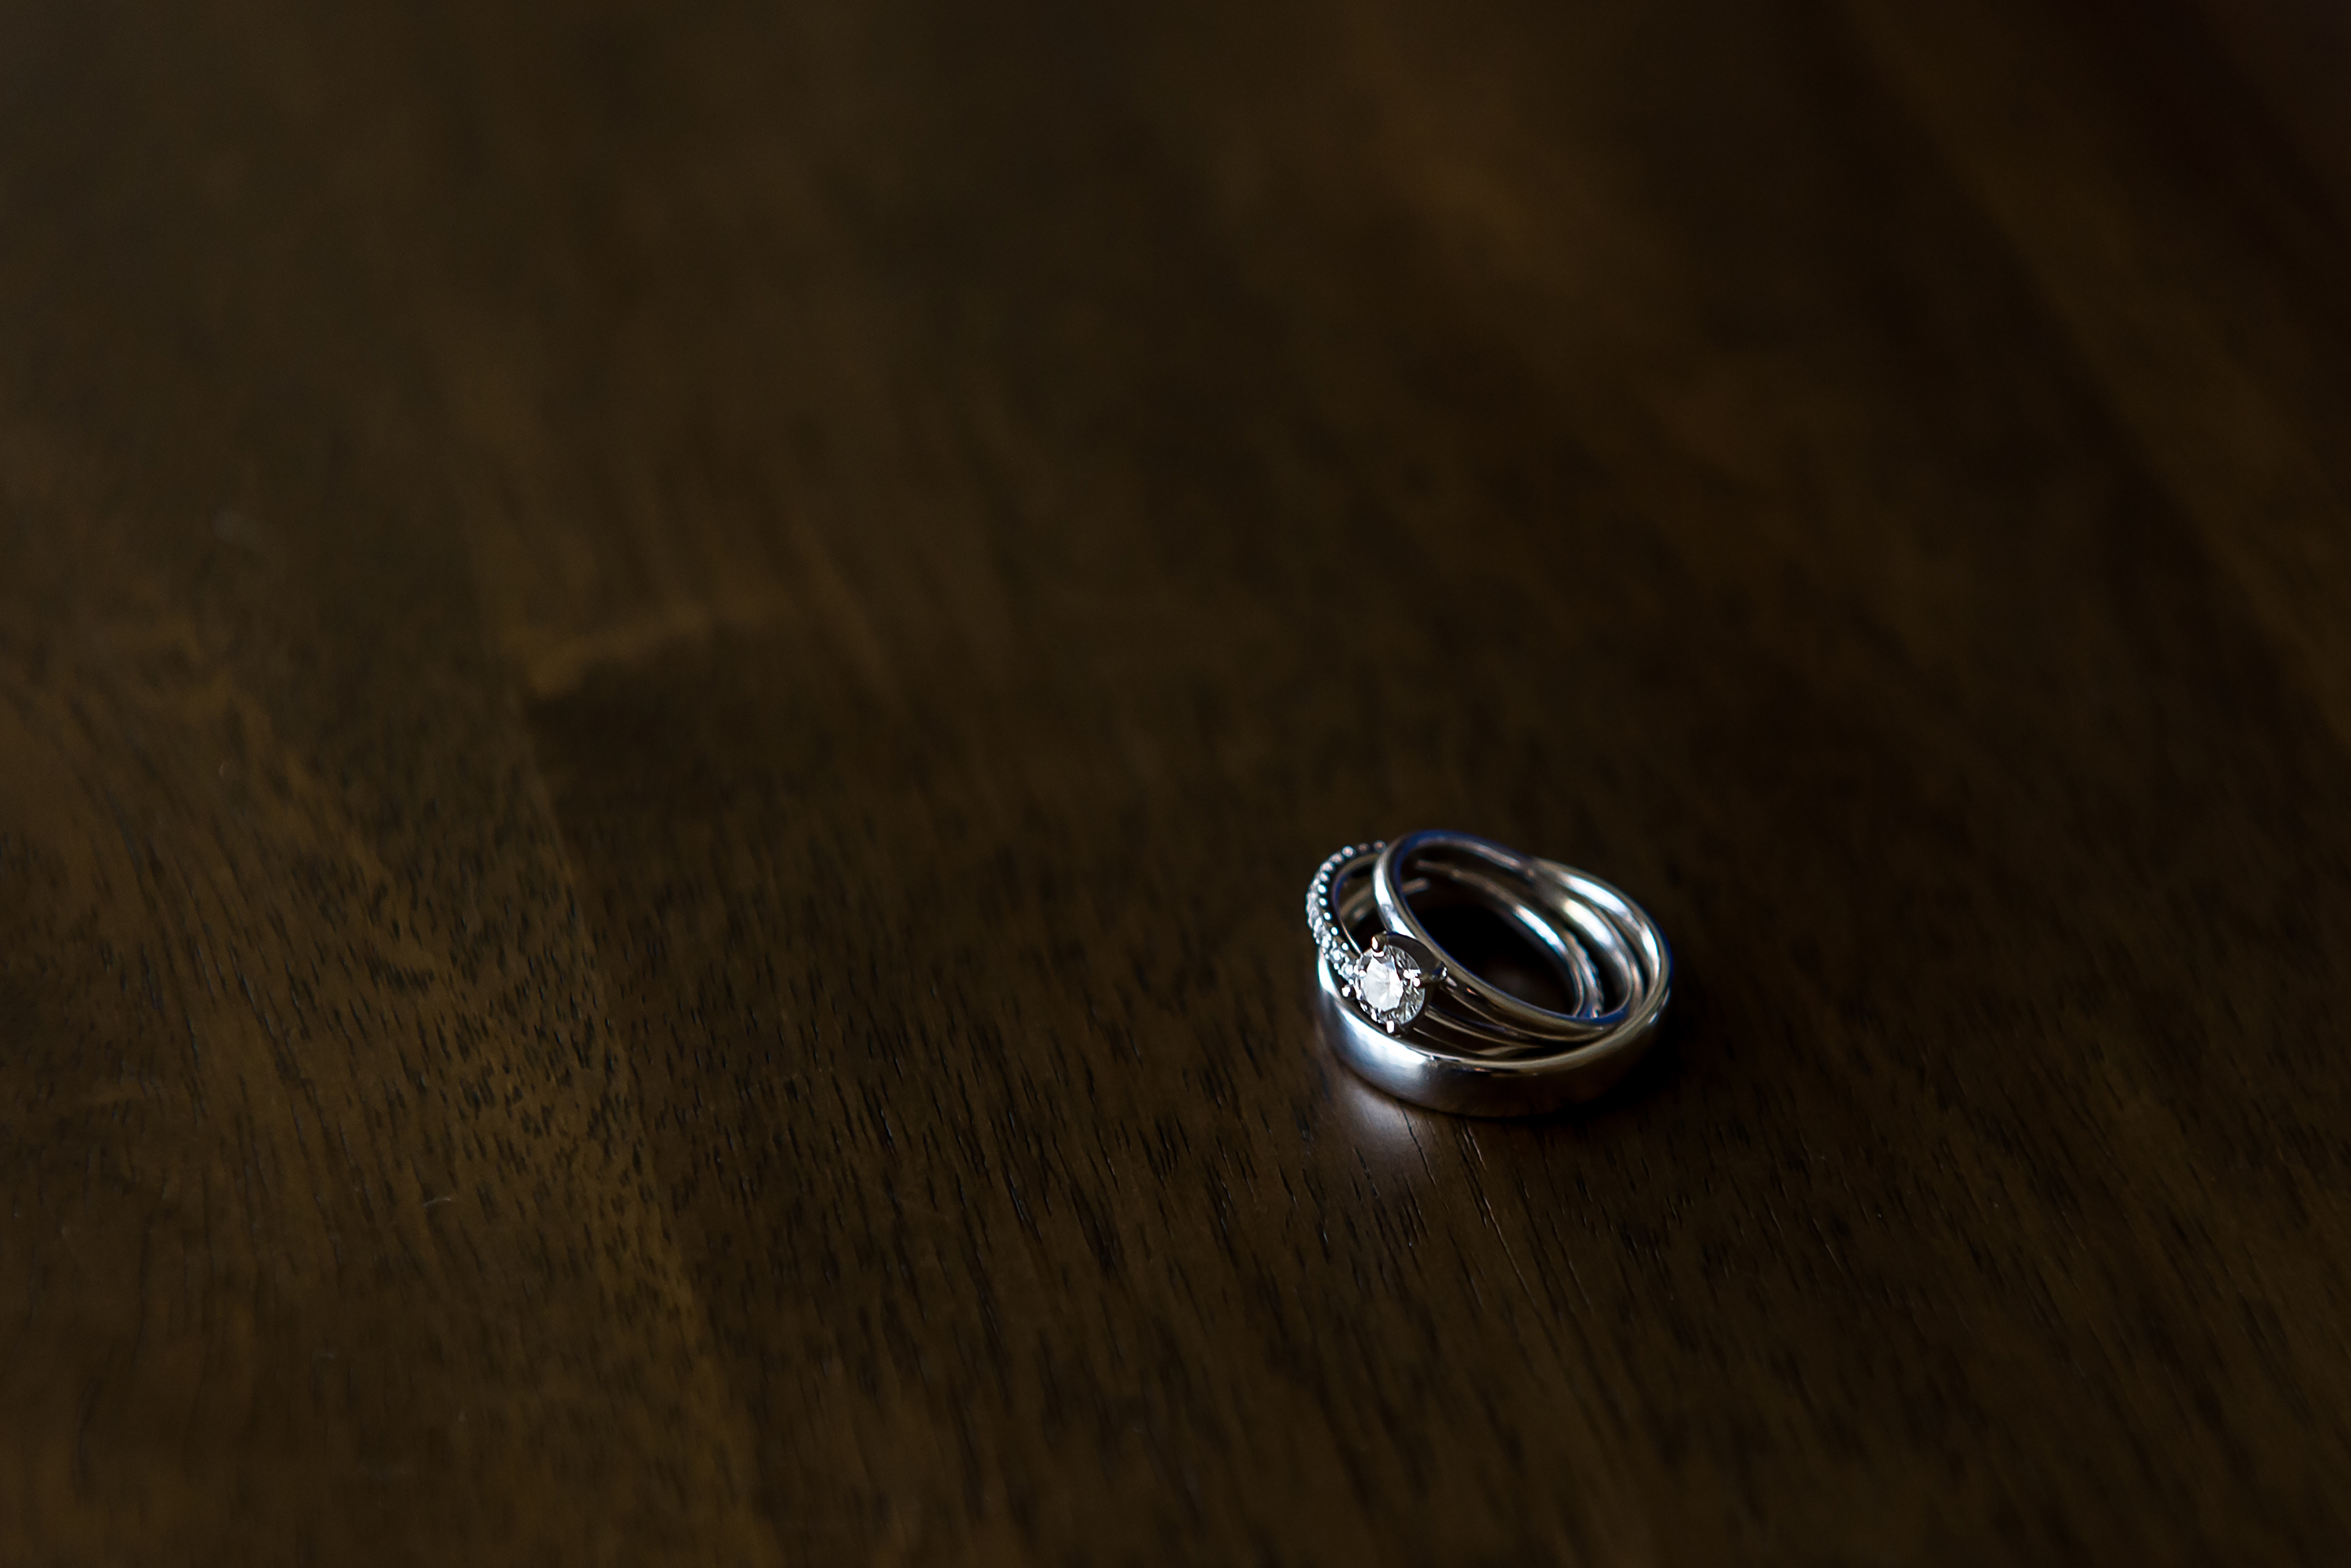 Wedding bands and rings